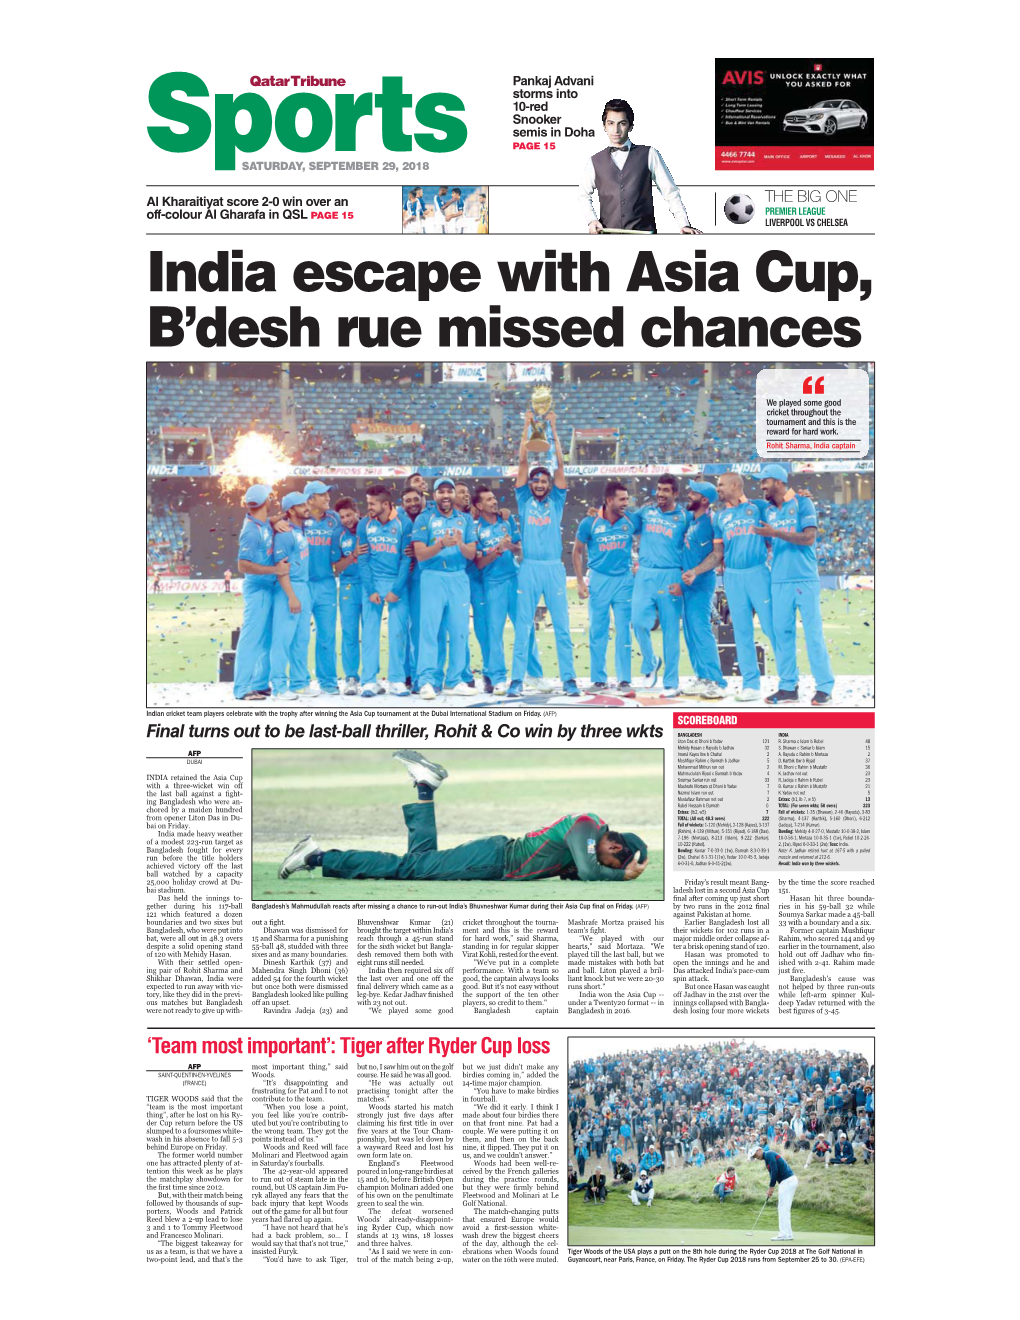 India Escape with Asia Cup, B'desh Rue Missed Chances